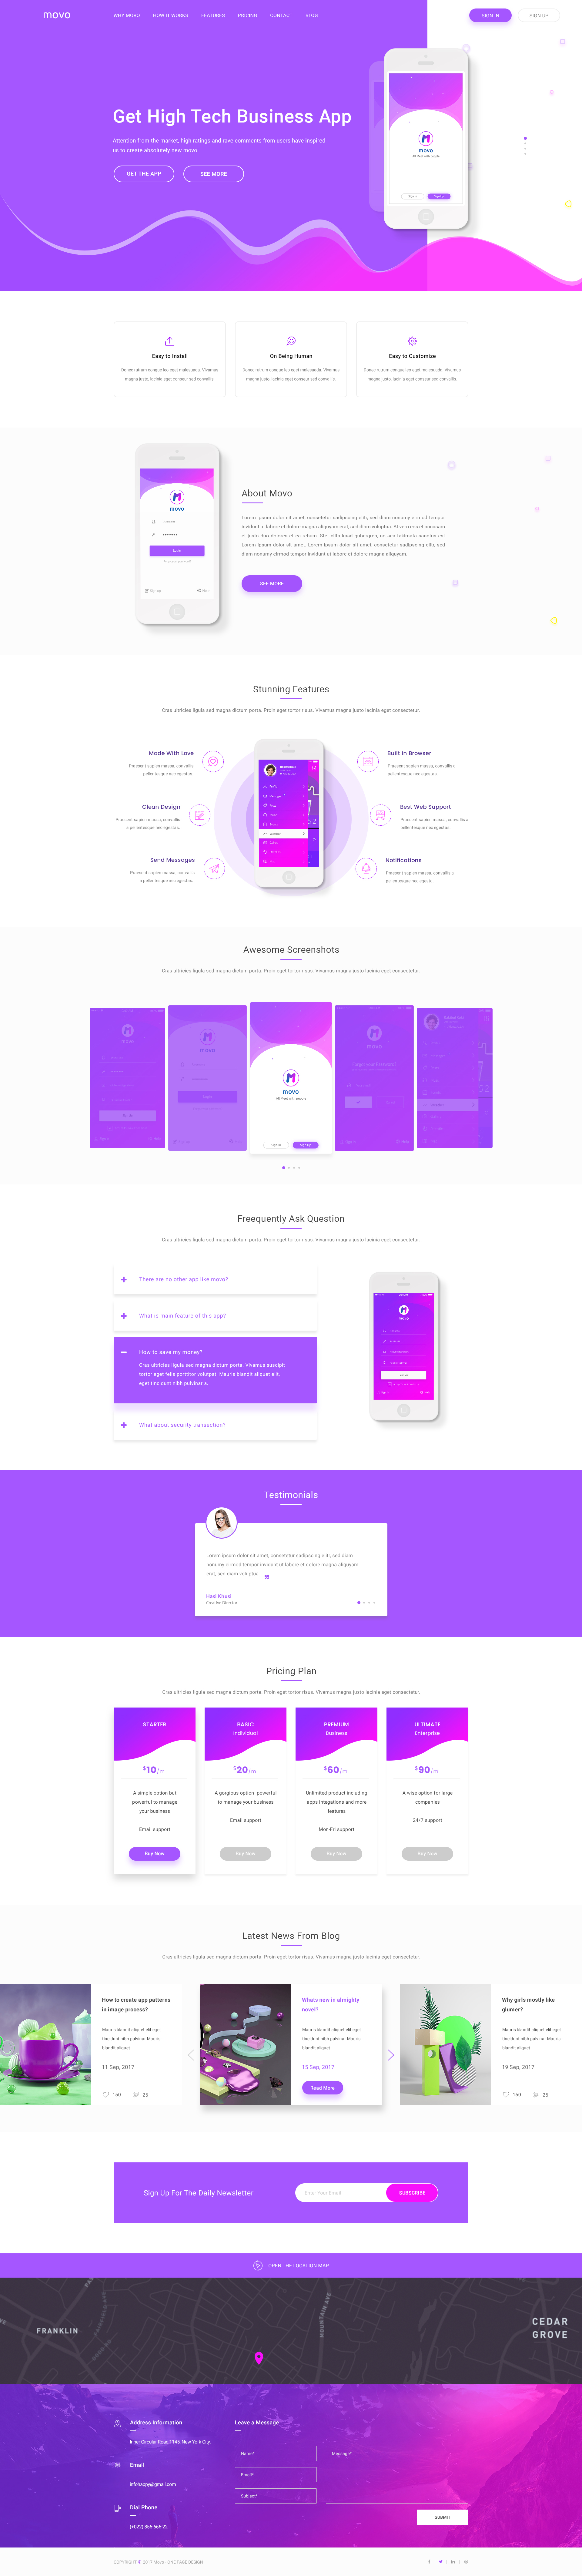 Landing page app template by M Sajib on Dribbble